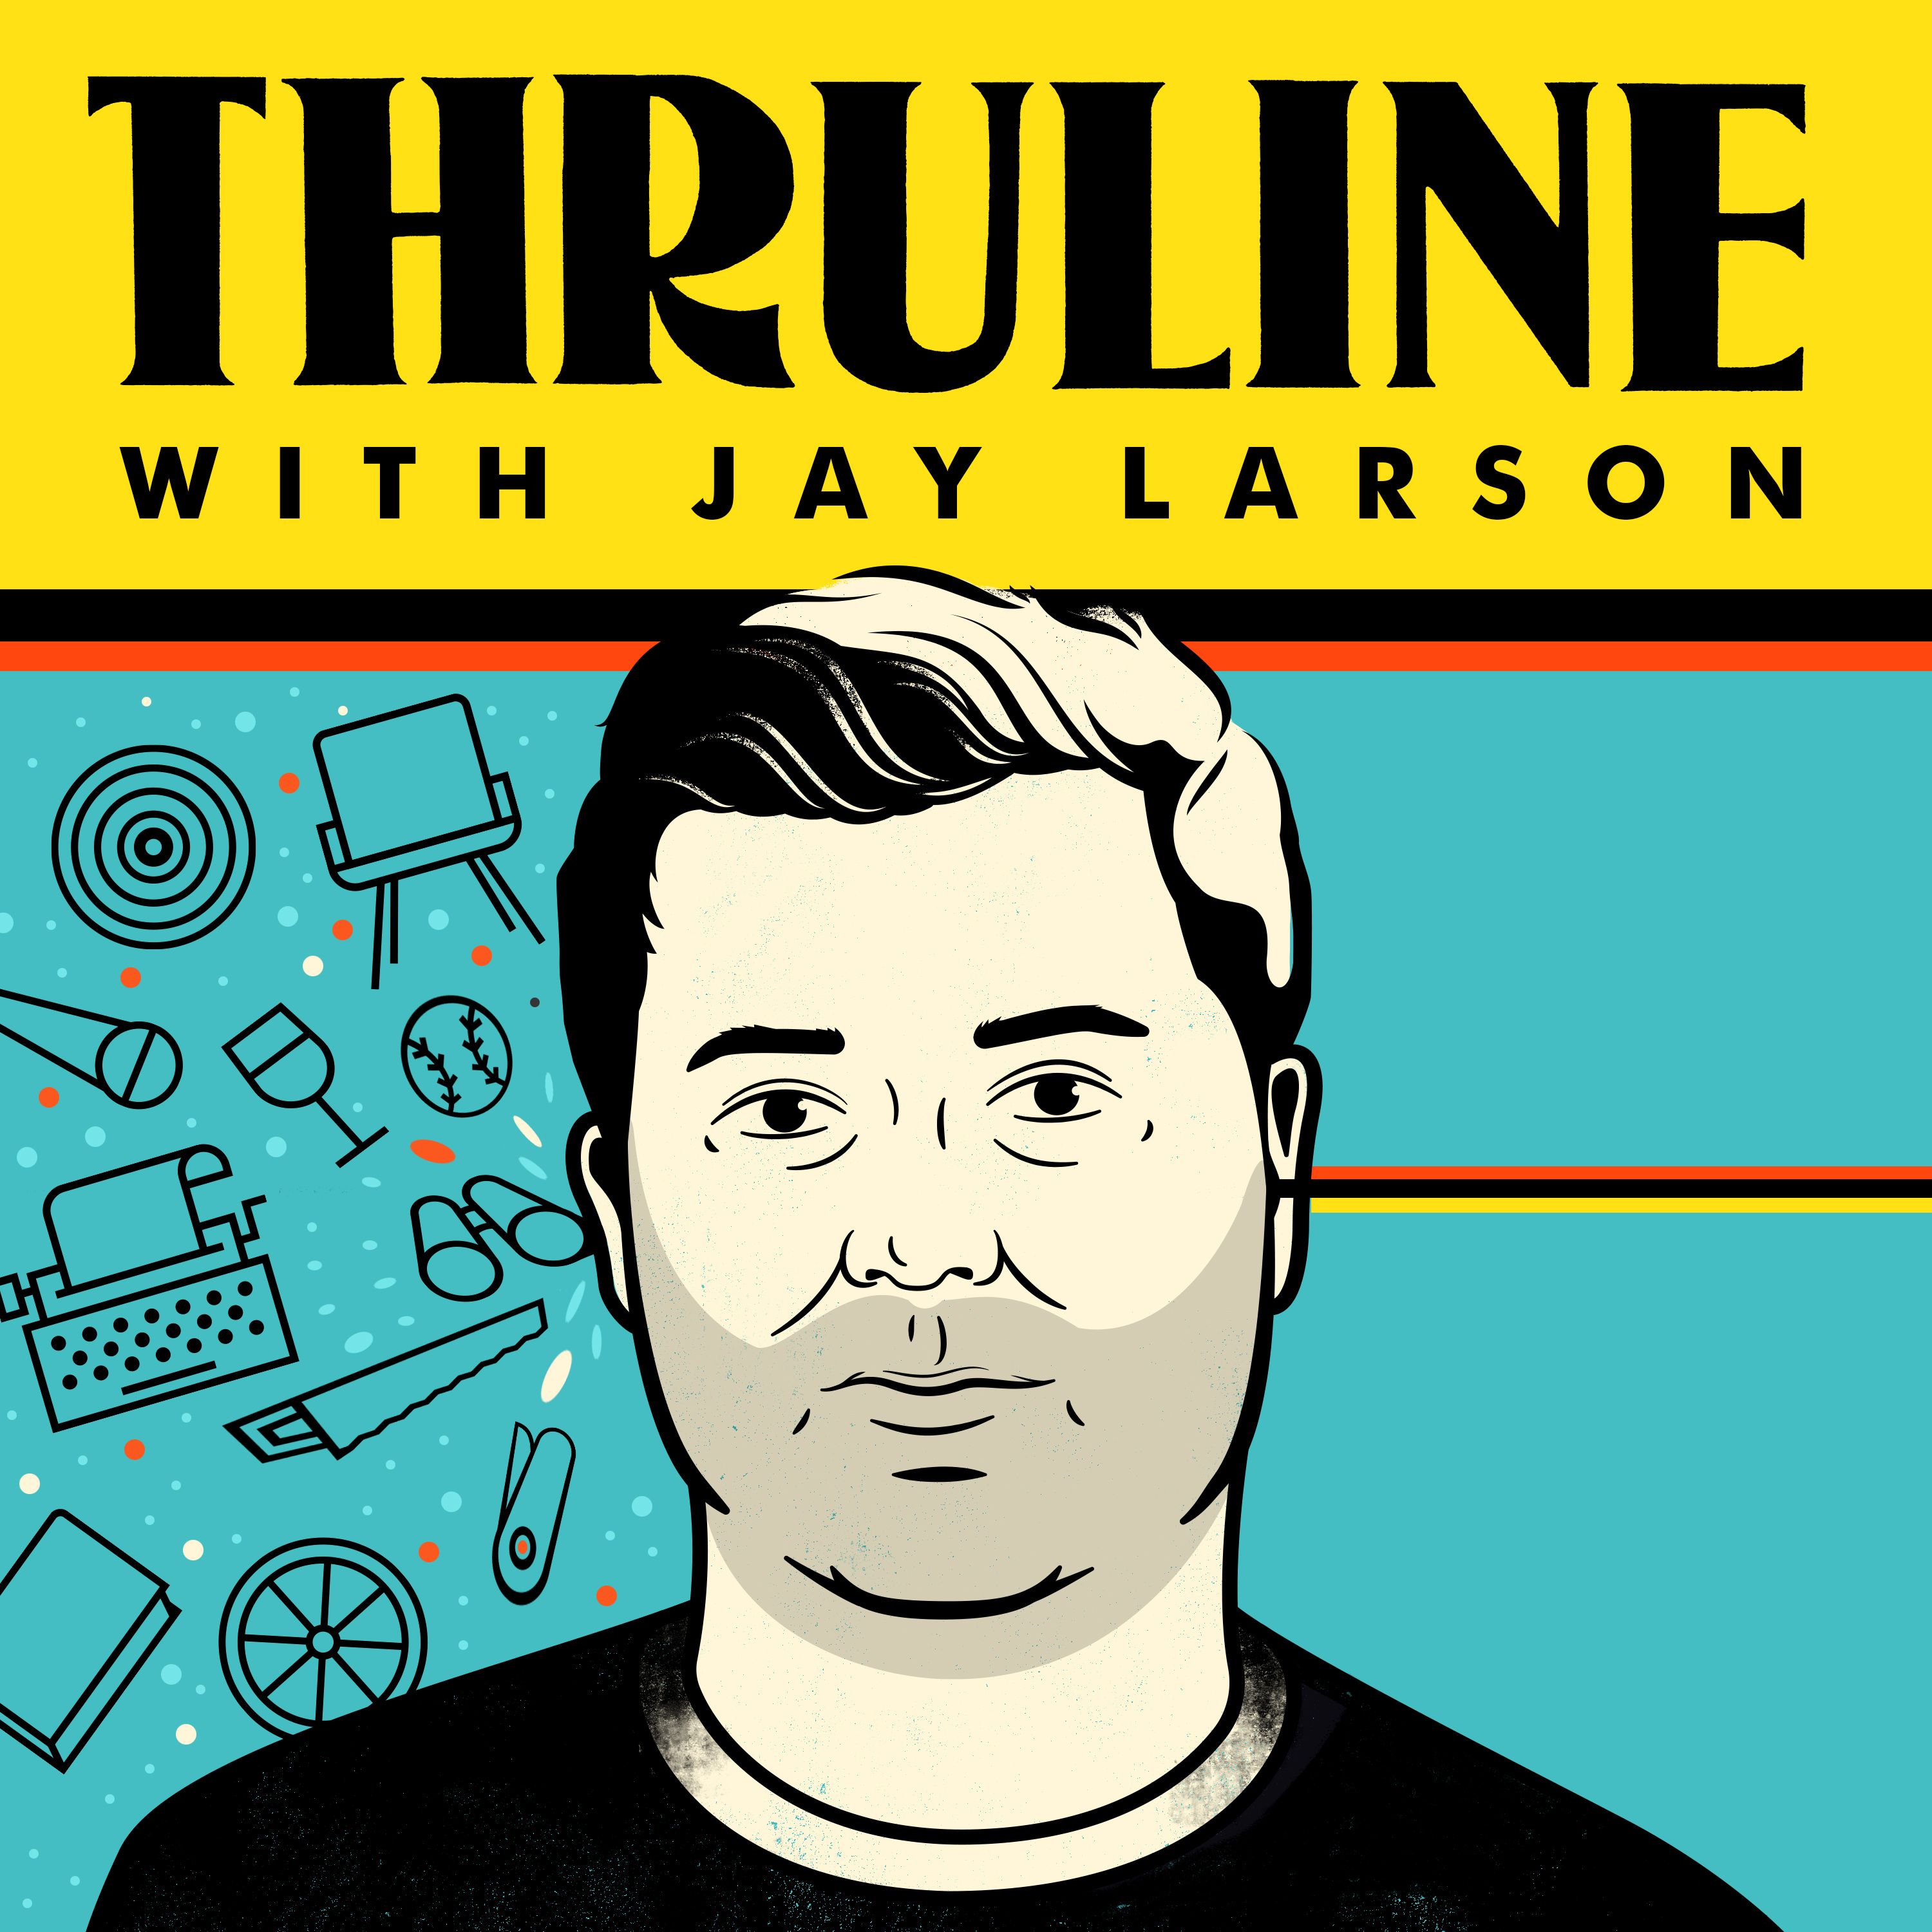 Thruline with Jay Larson Podcast Cover - Square